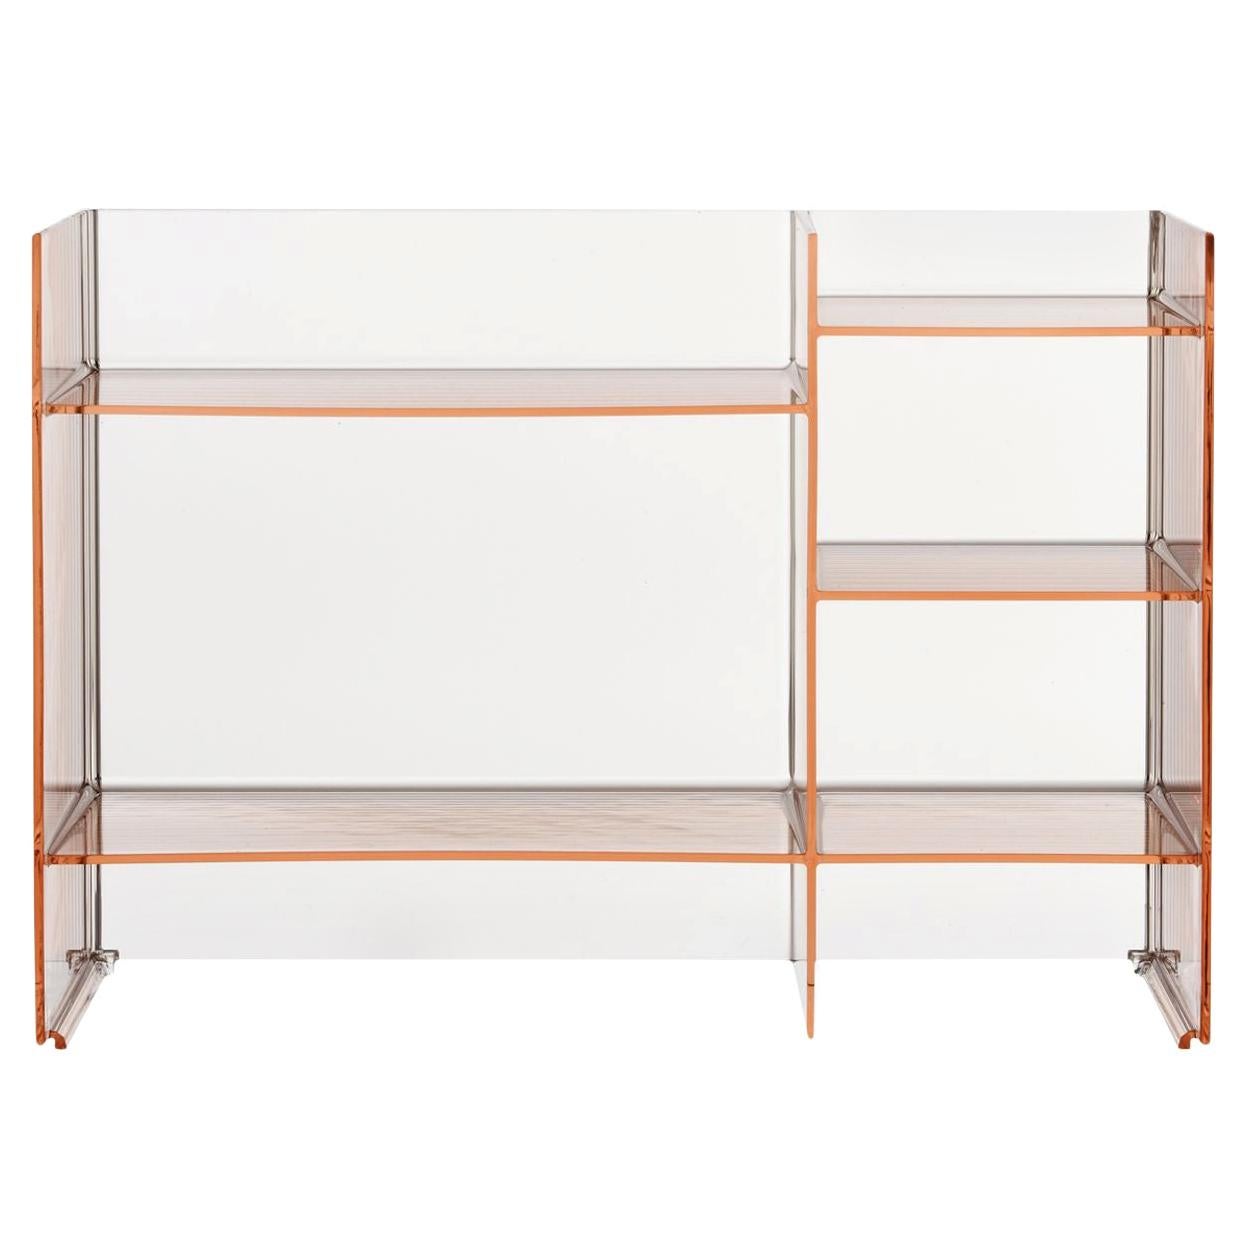 Kartell Sound Rack Modular Bookcase in Nude by Ludovica and Roberto Palomba